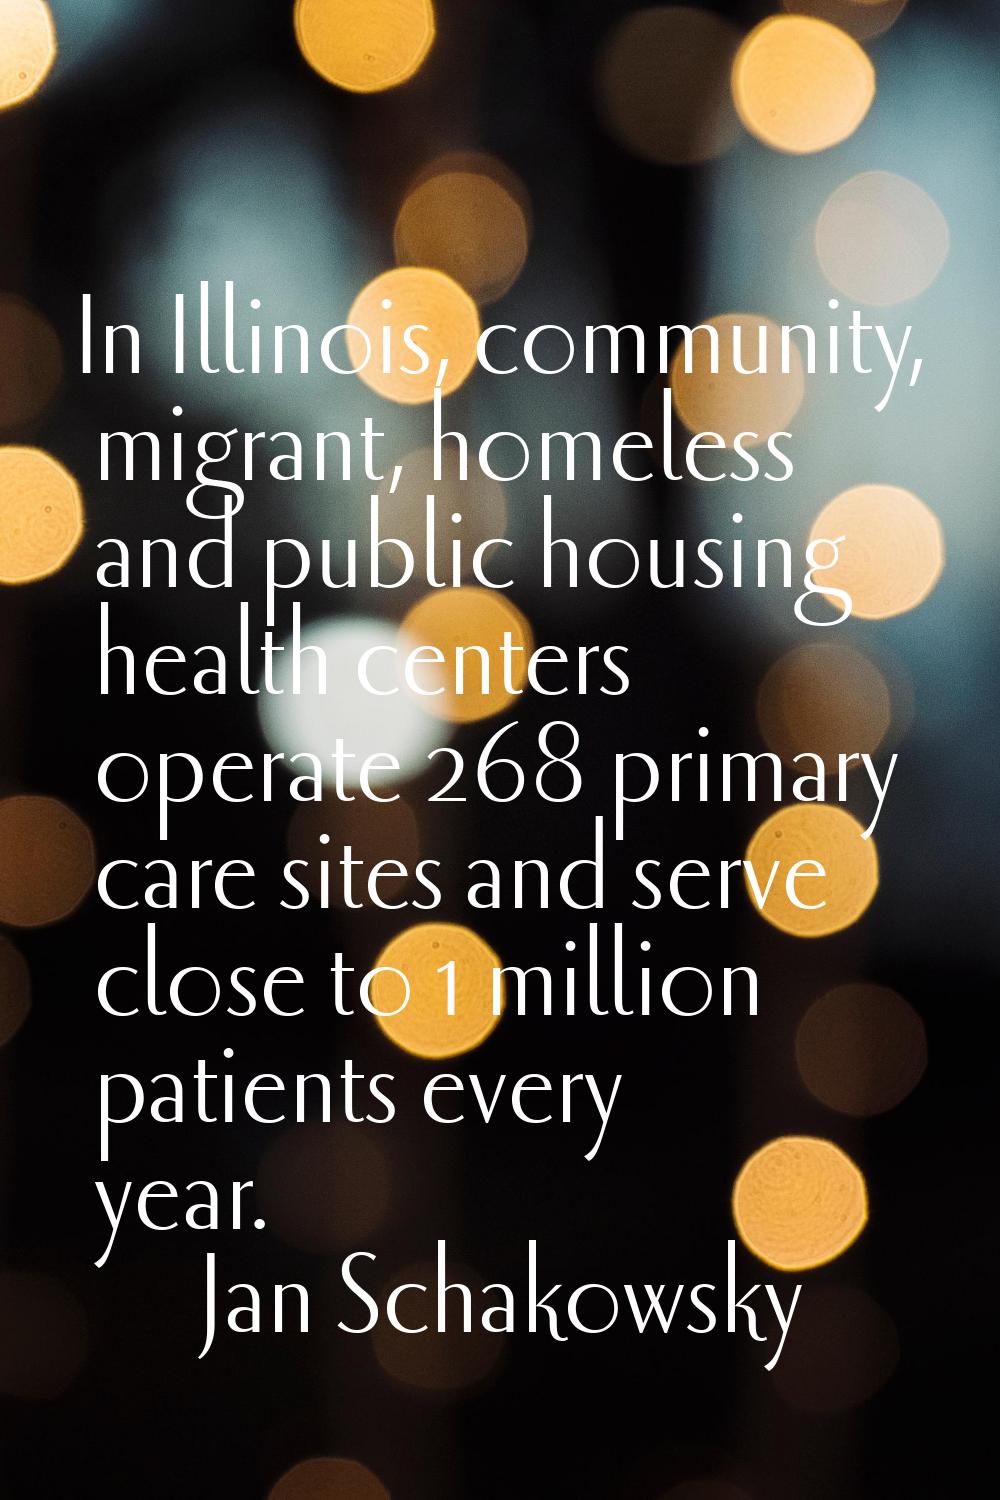 In Illinois, community, migrant, homeless and public housing health centers operate 268 primary car